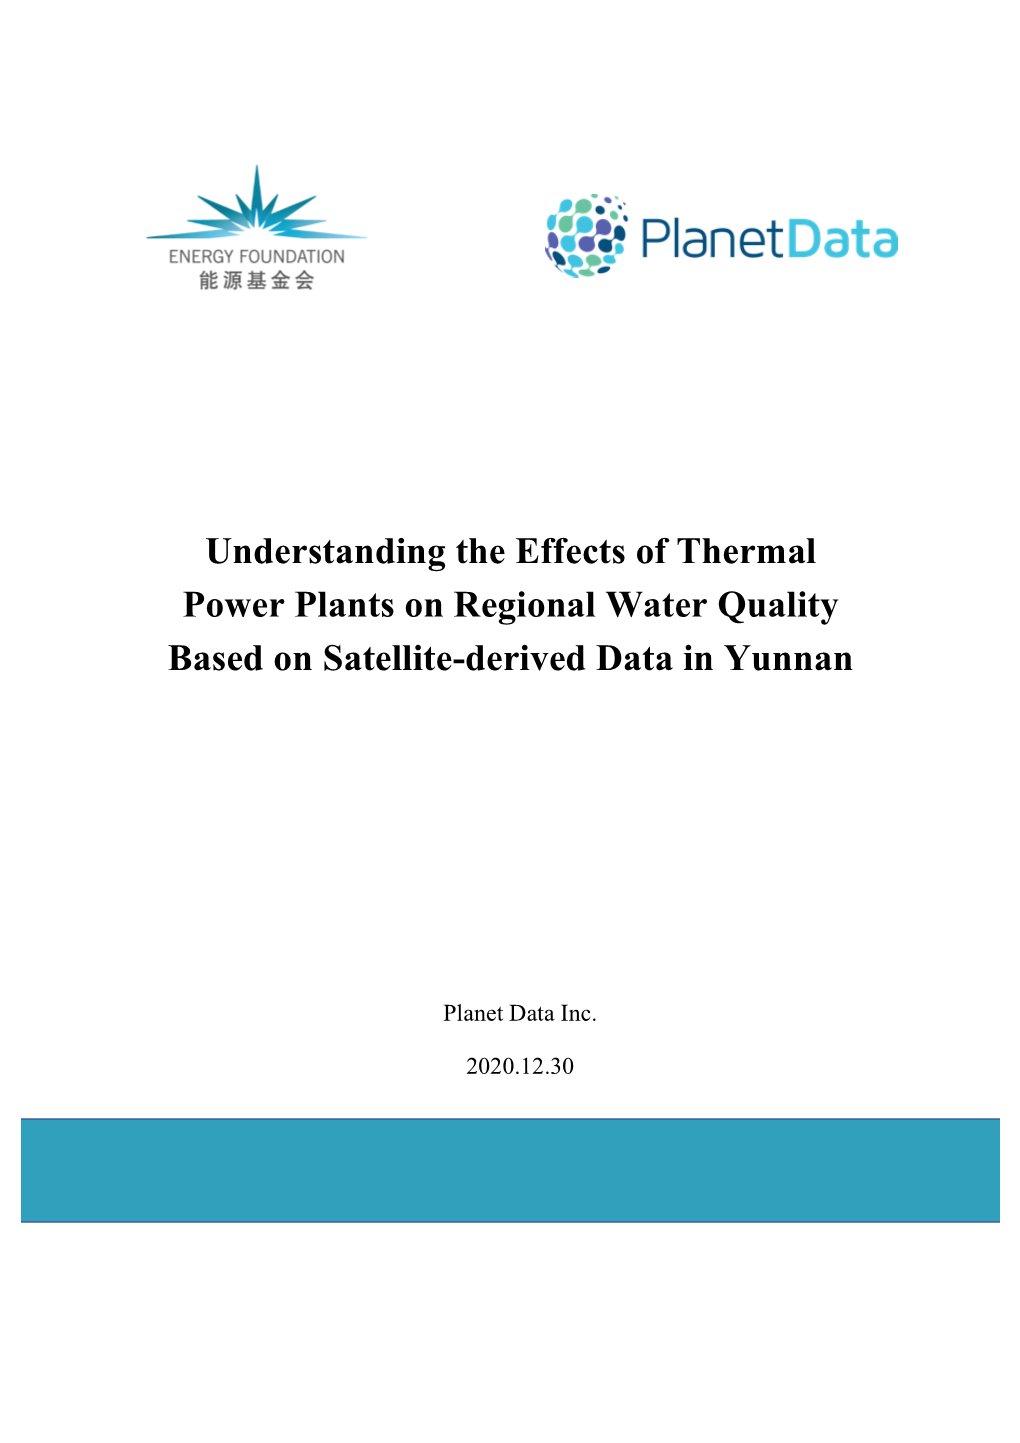 Understanding the Effects of Thermal Power Plants on Regional Water Quality Based on Satellite-Derived Data in Yunnan